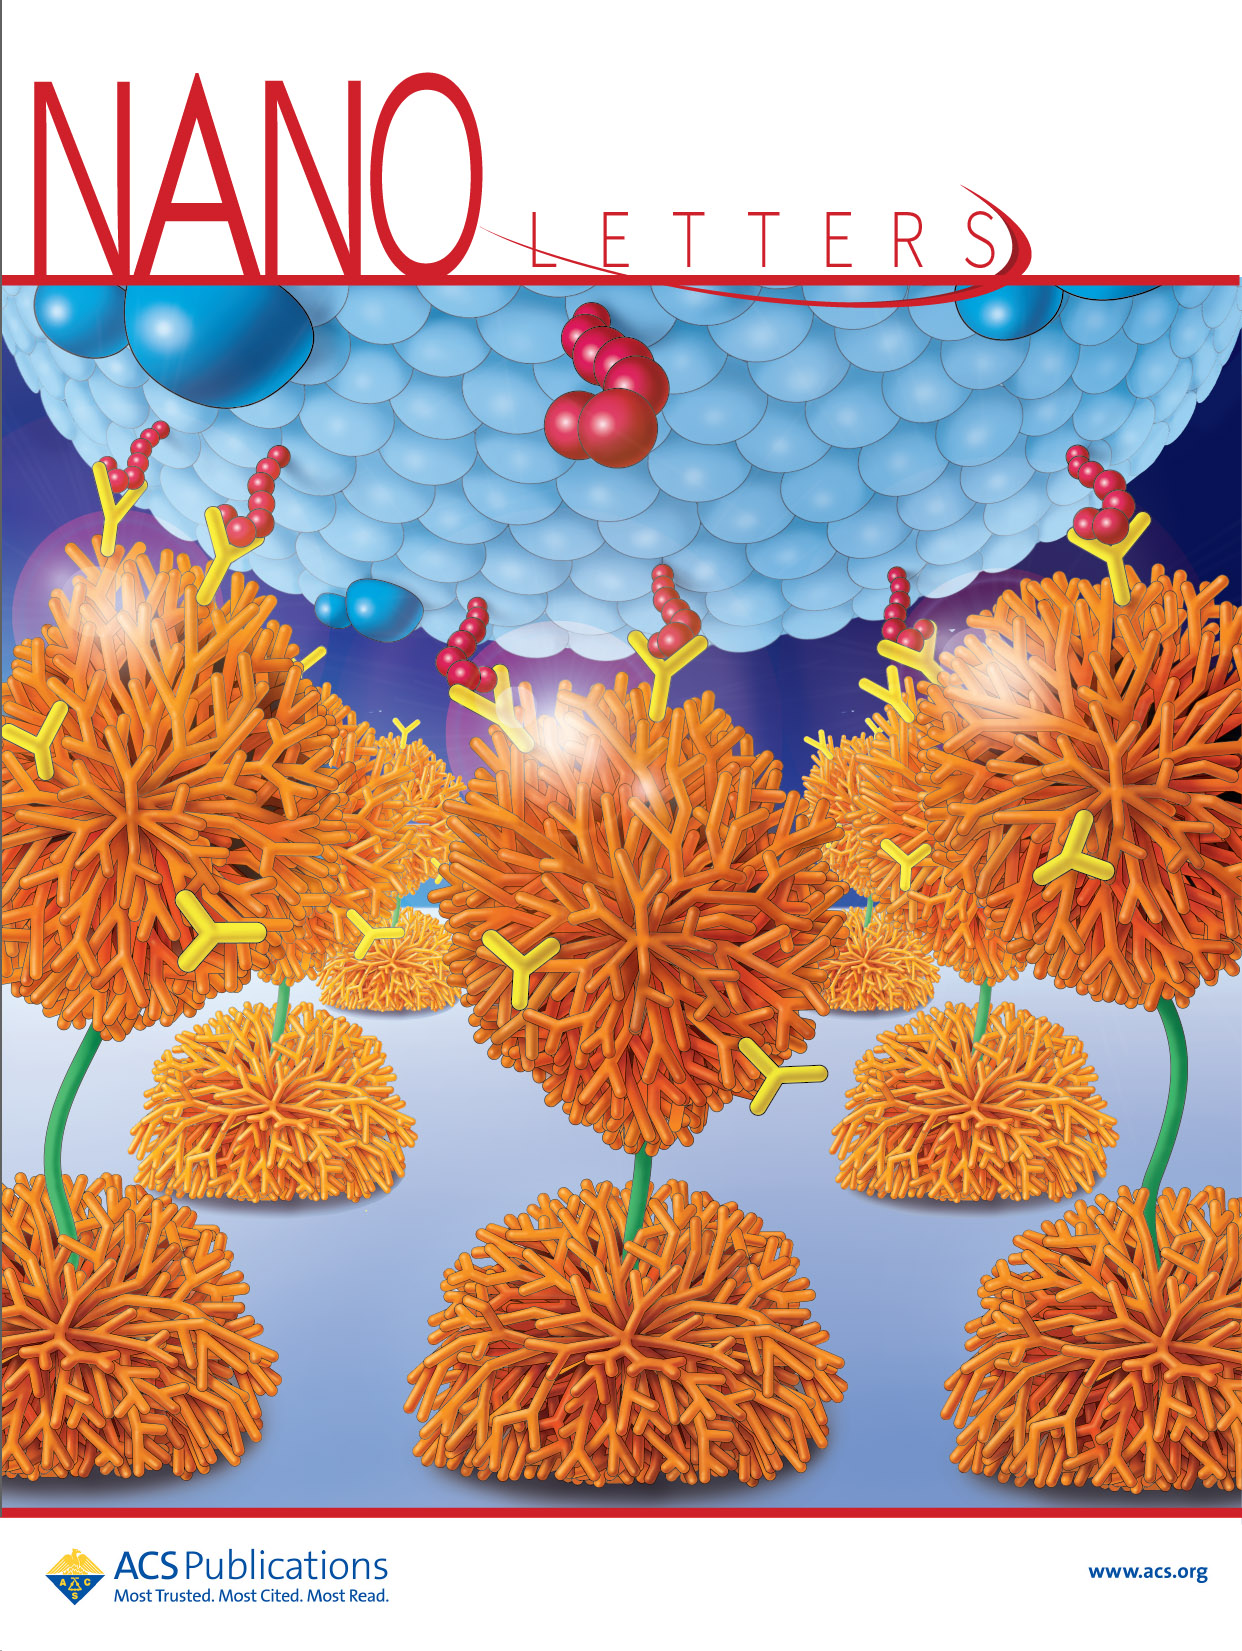 NANO letters journal cover done by Sally Griffith-Oh